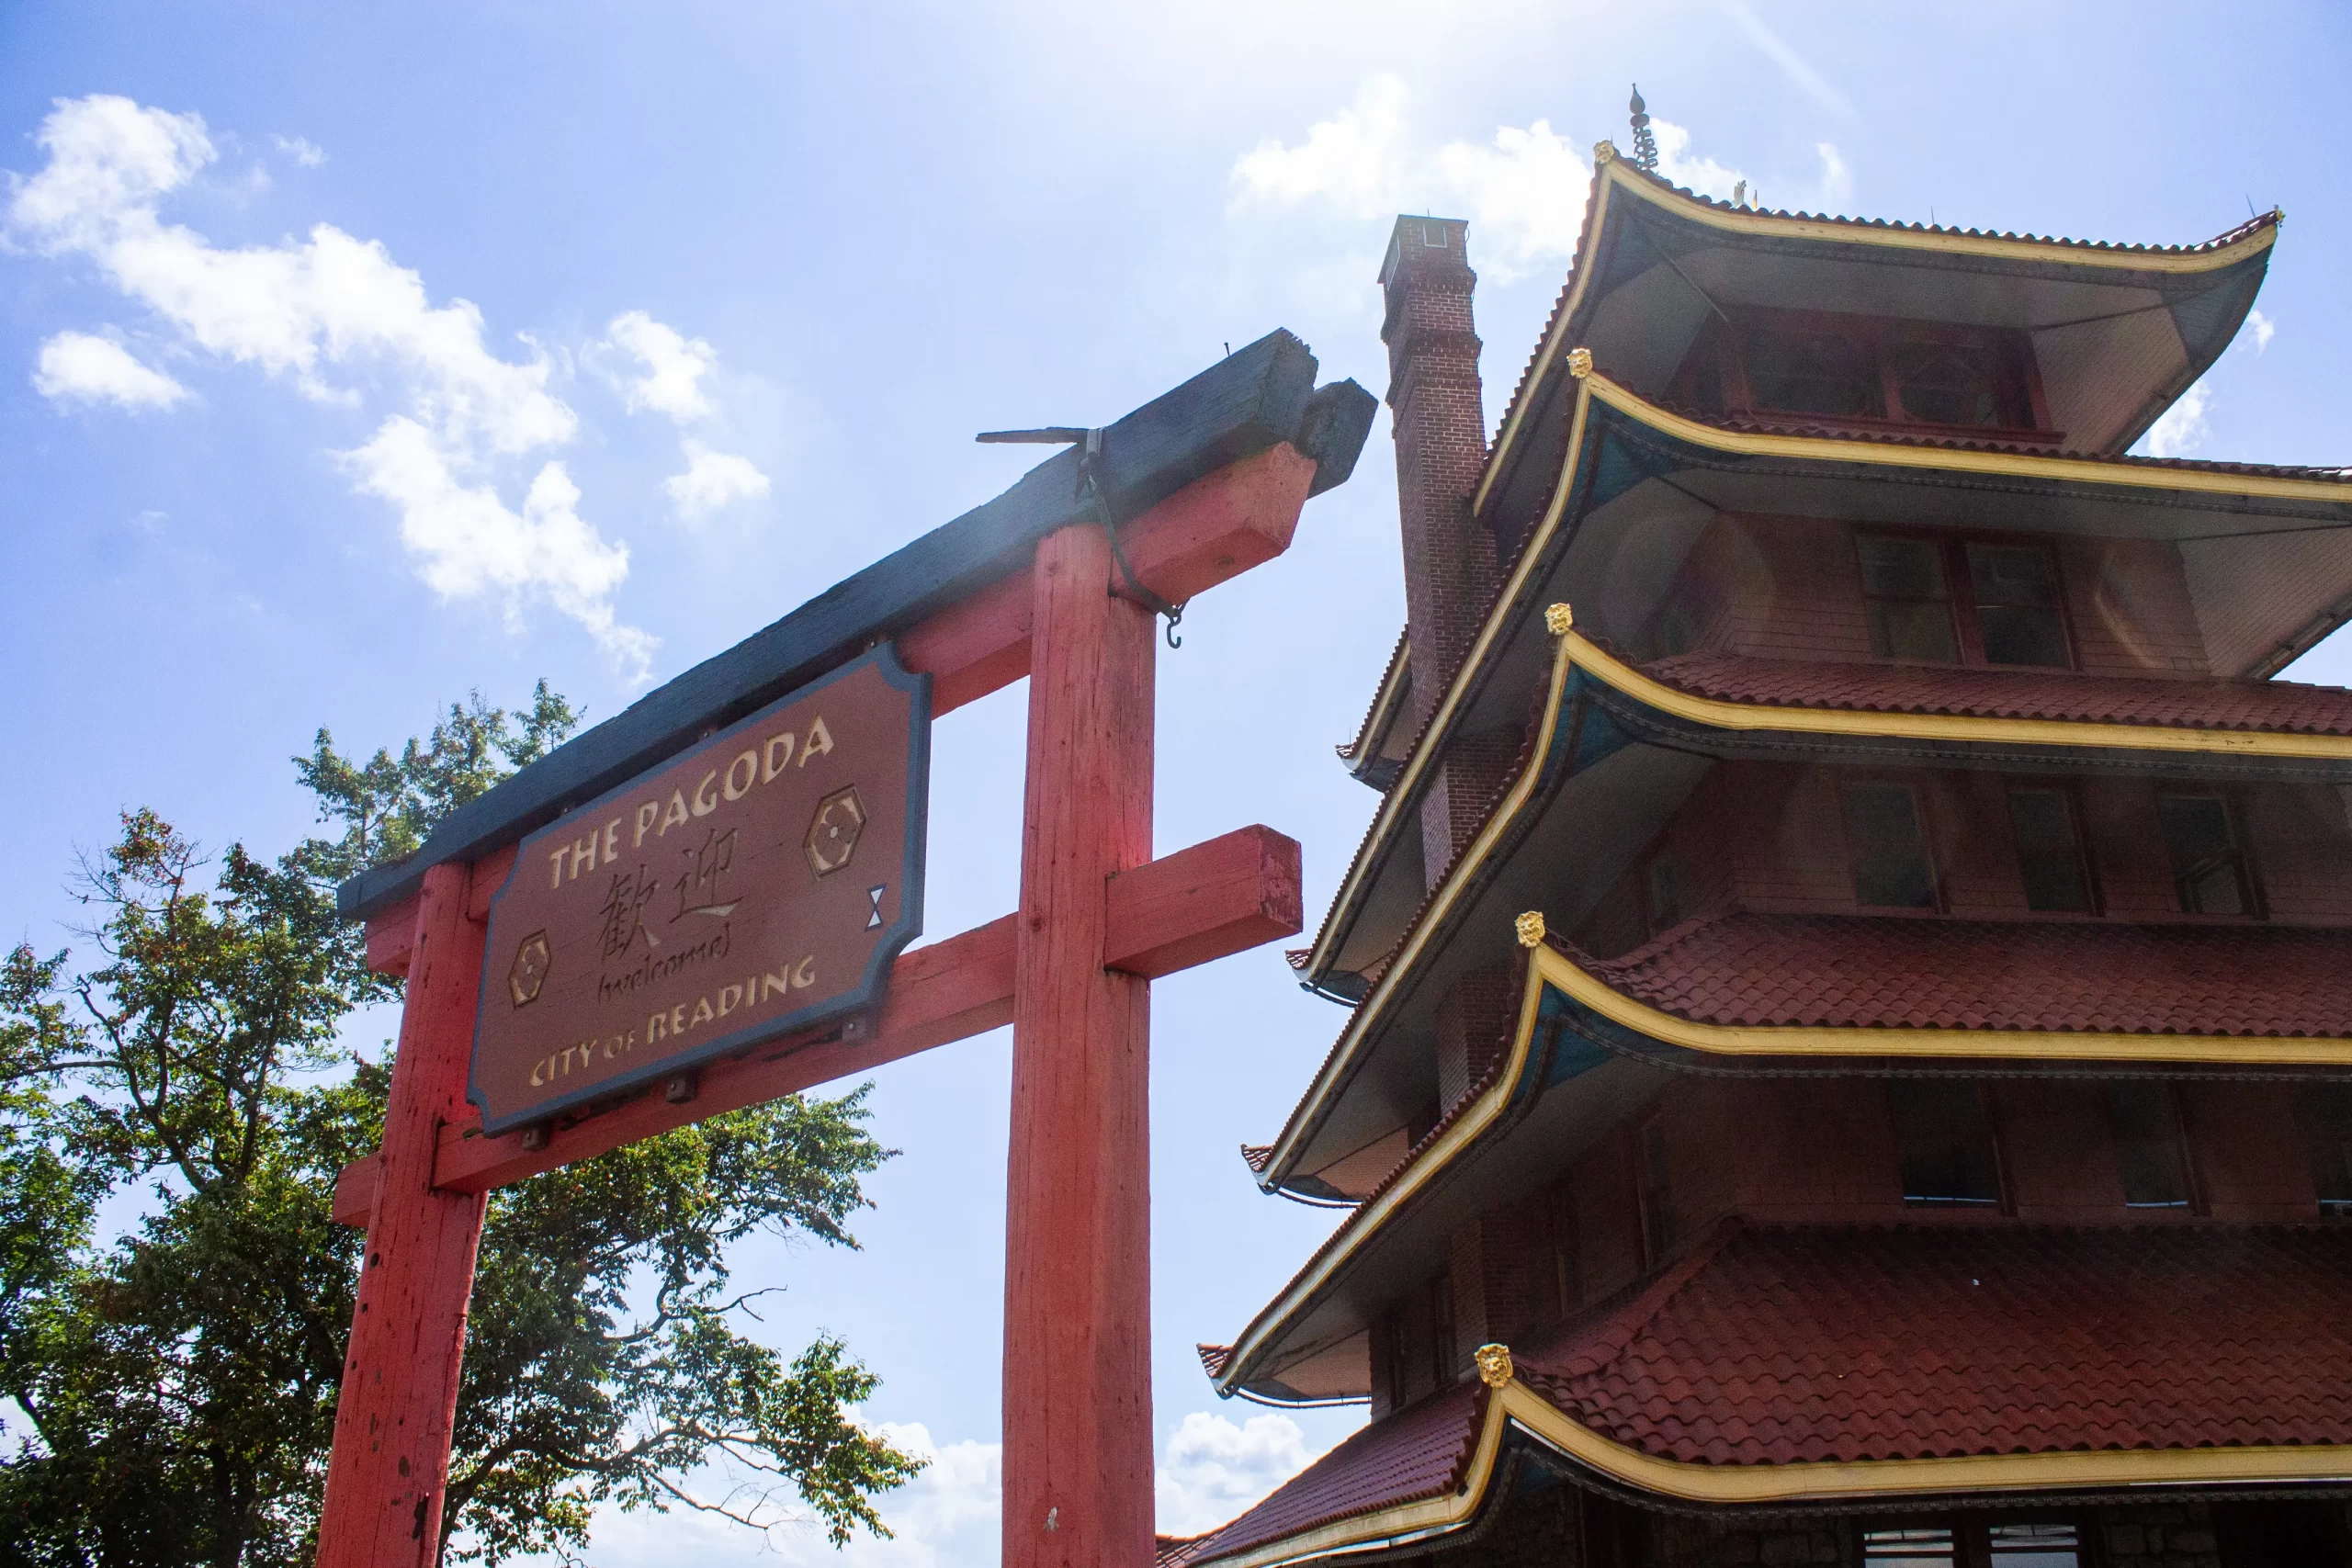 The pagoda with the sign that says "The Pagoda, City of Reading" next to it.